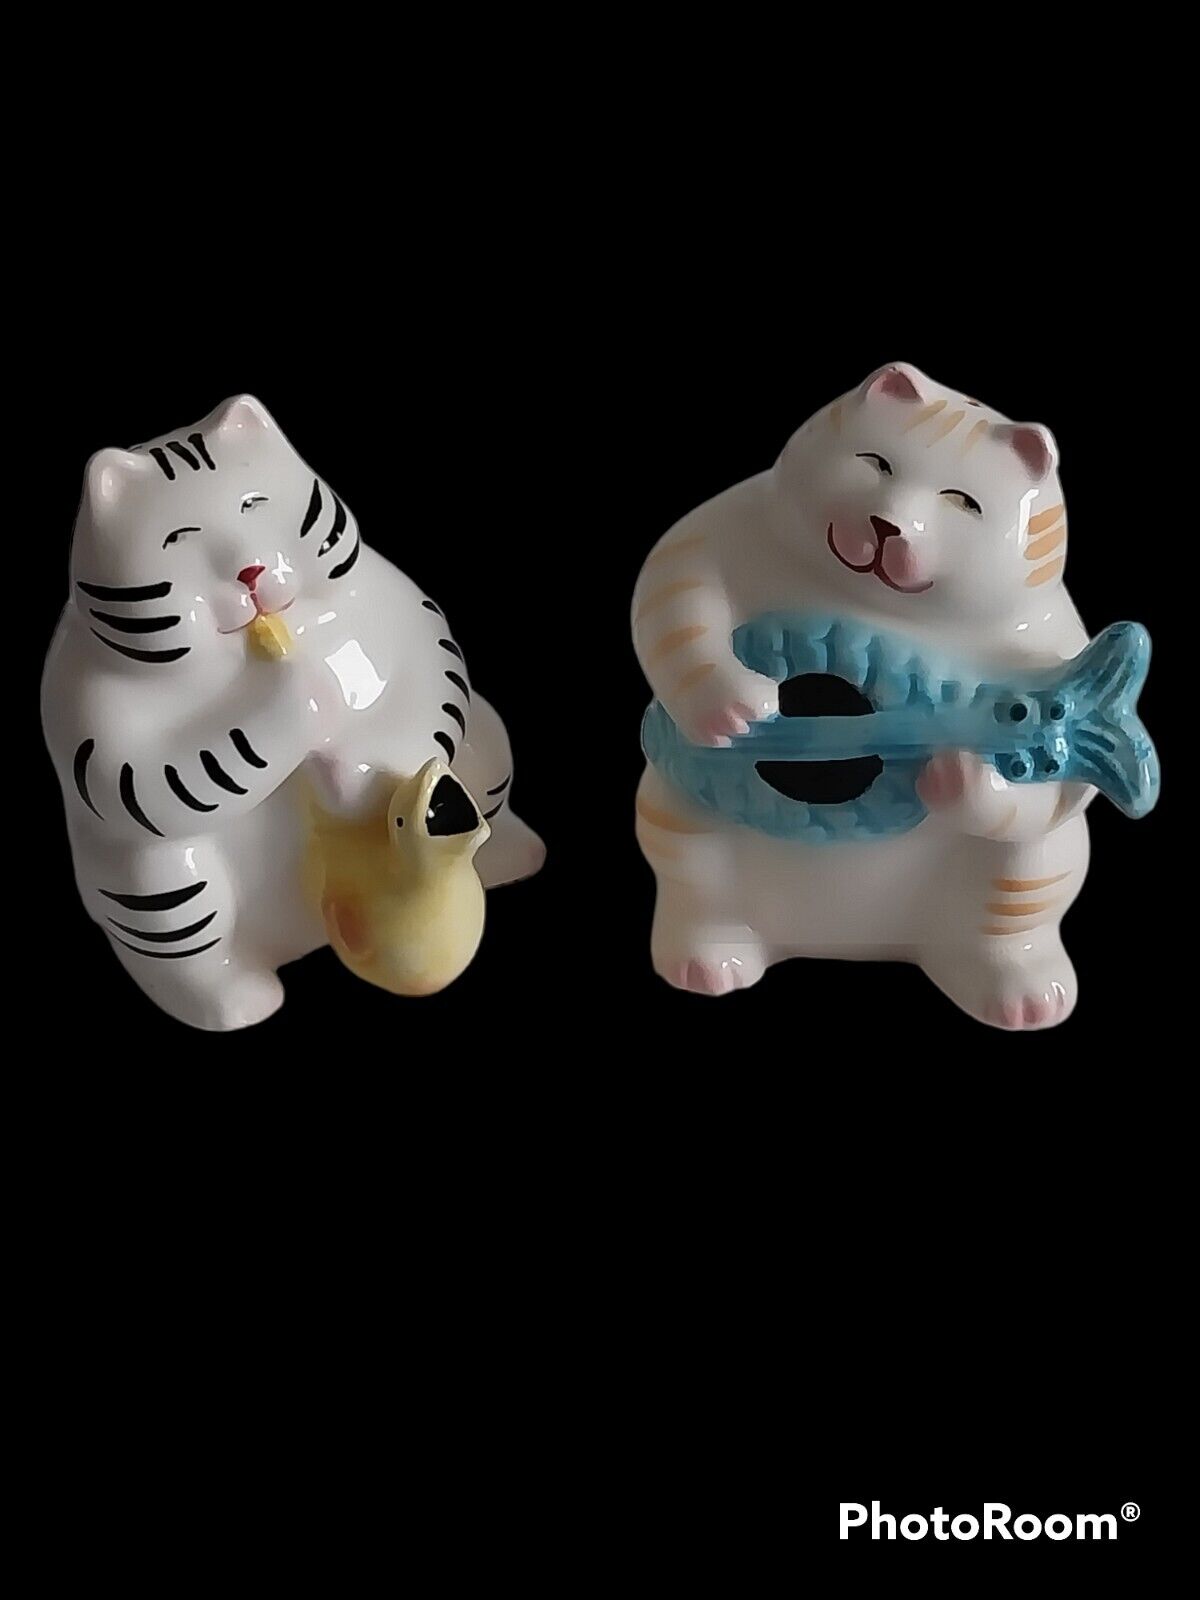 Vtg Clay Art Ceramic Chubby Fat Kitty Cats Playing Music Salt & Pepper Shakers